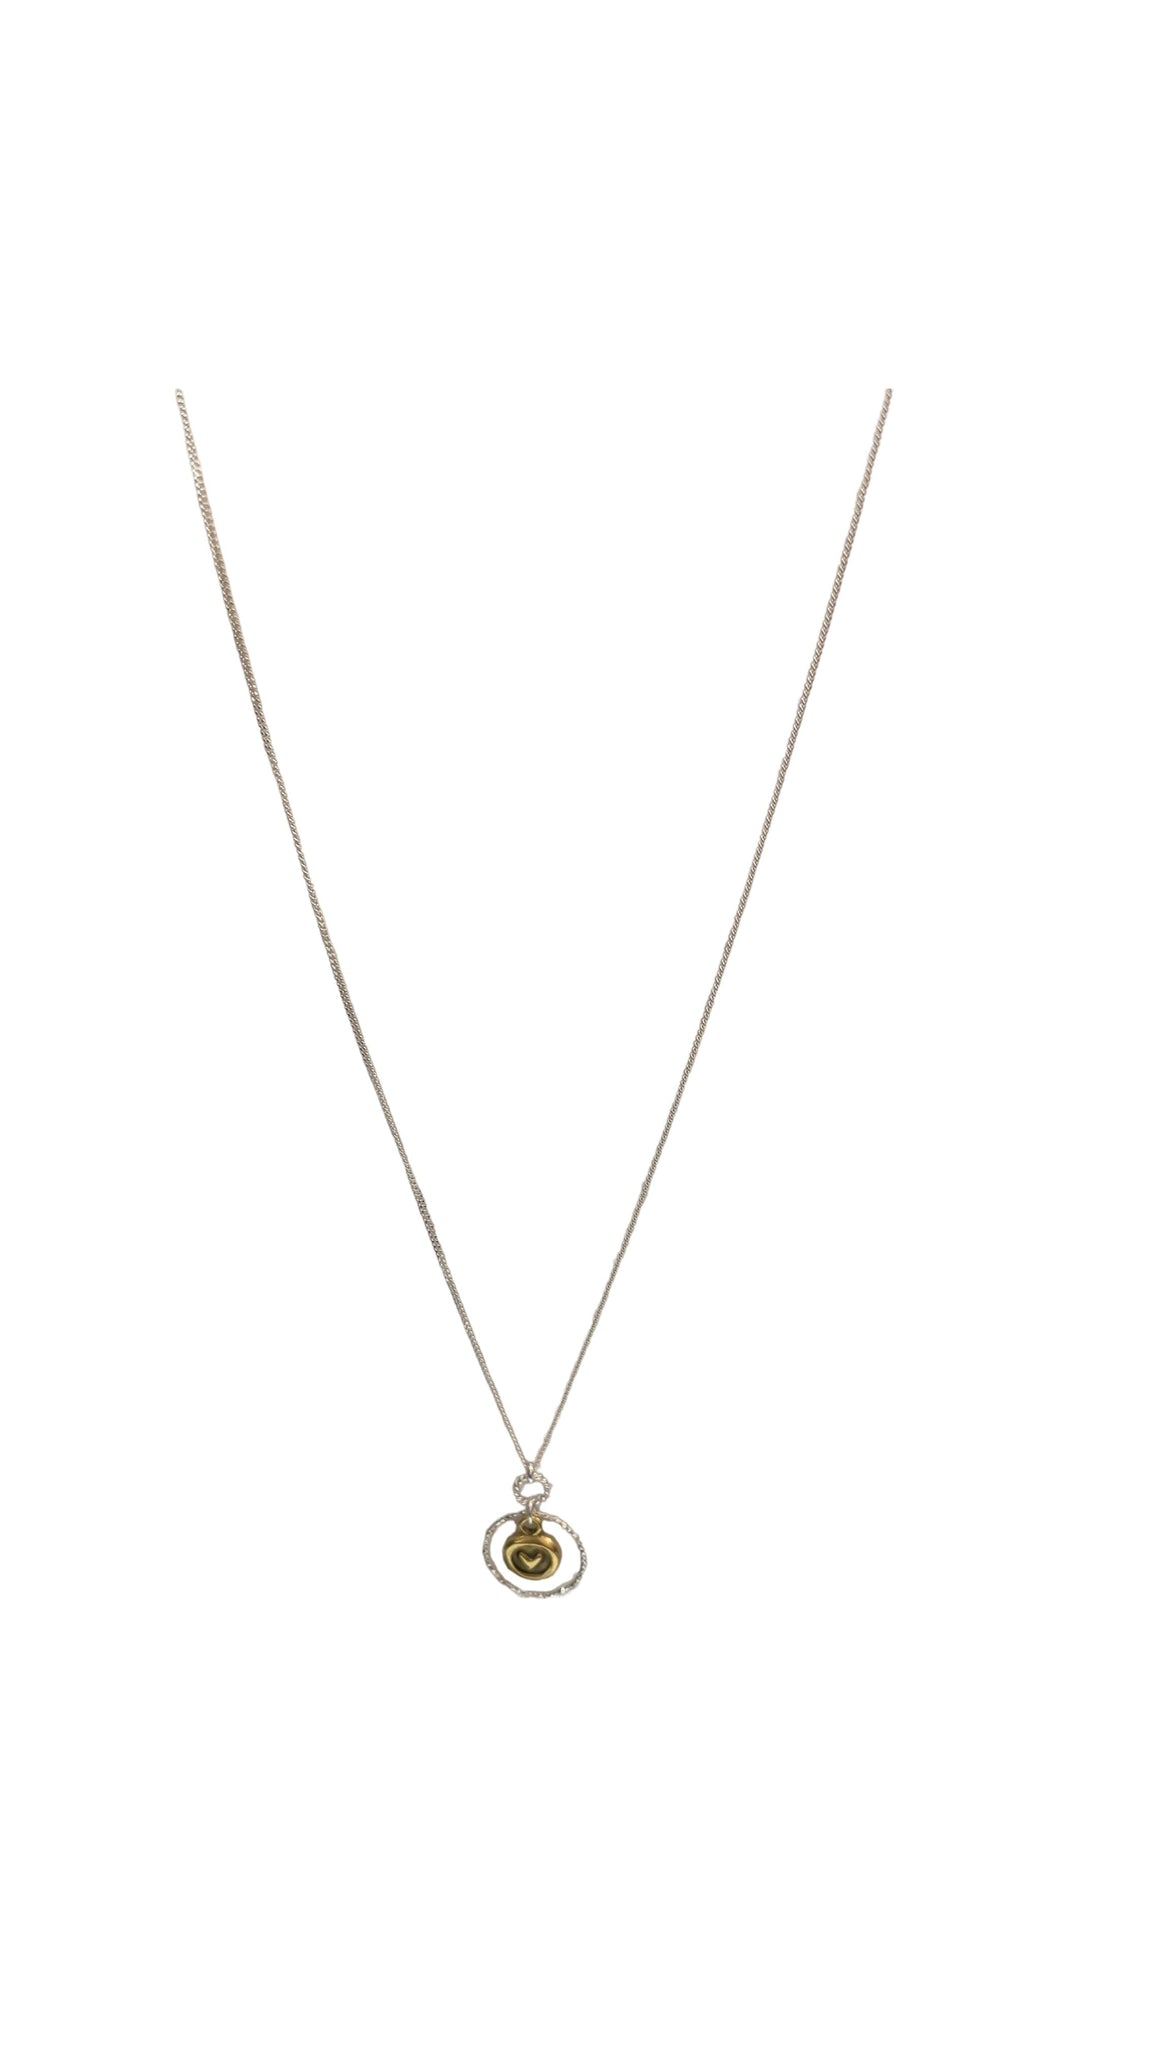 GOLD HEART DROP NECKLACE FashionWear Collection Gold 